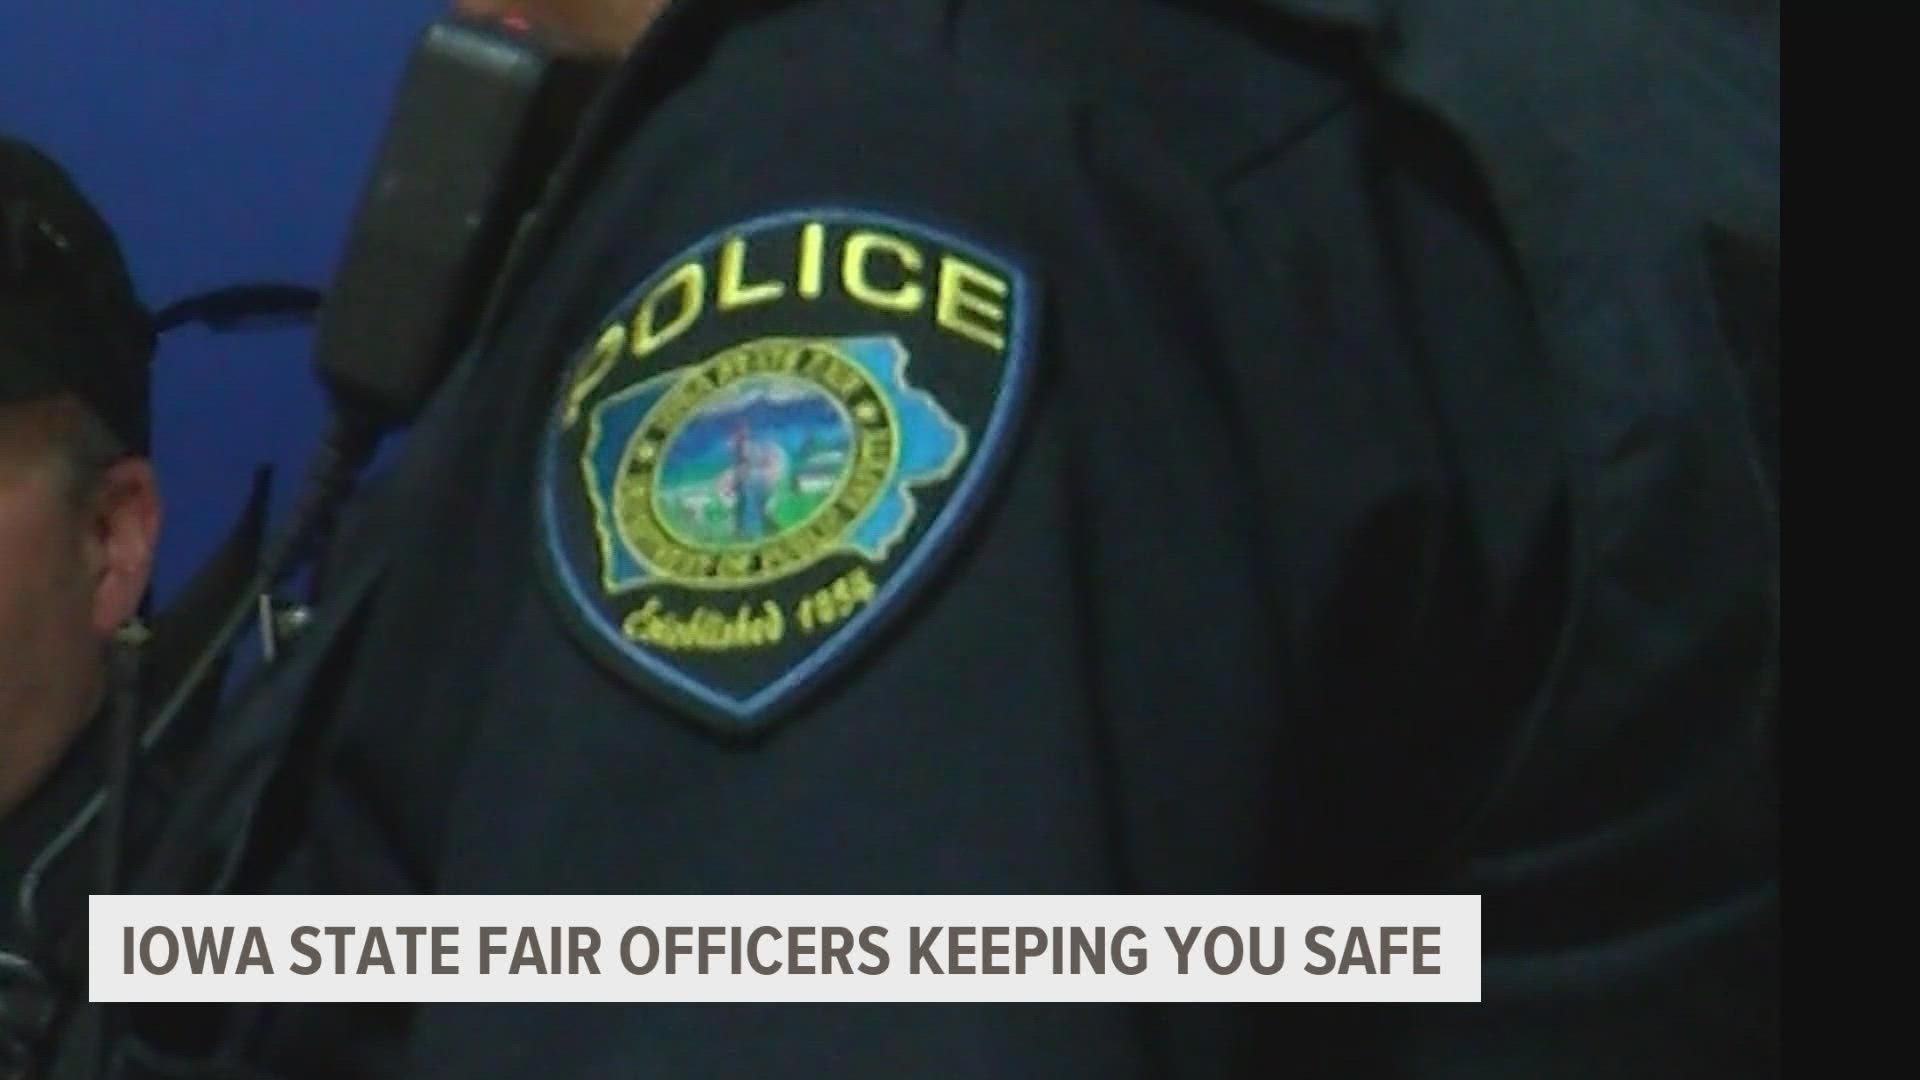 The Iowa State Fair Police Department keeps a watchful eye on the fairgrounds, 24/7. This includes patrolling at all hours and checking multiple security cameras.